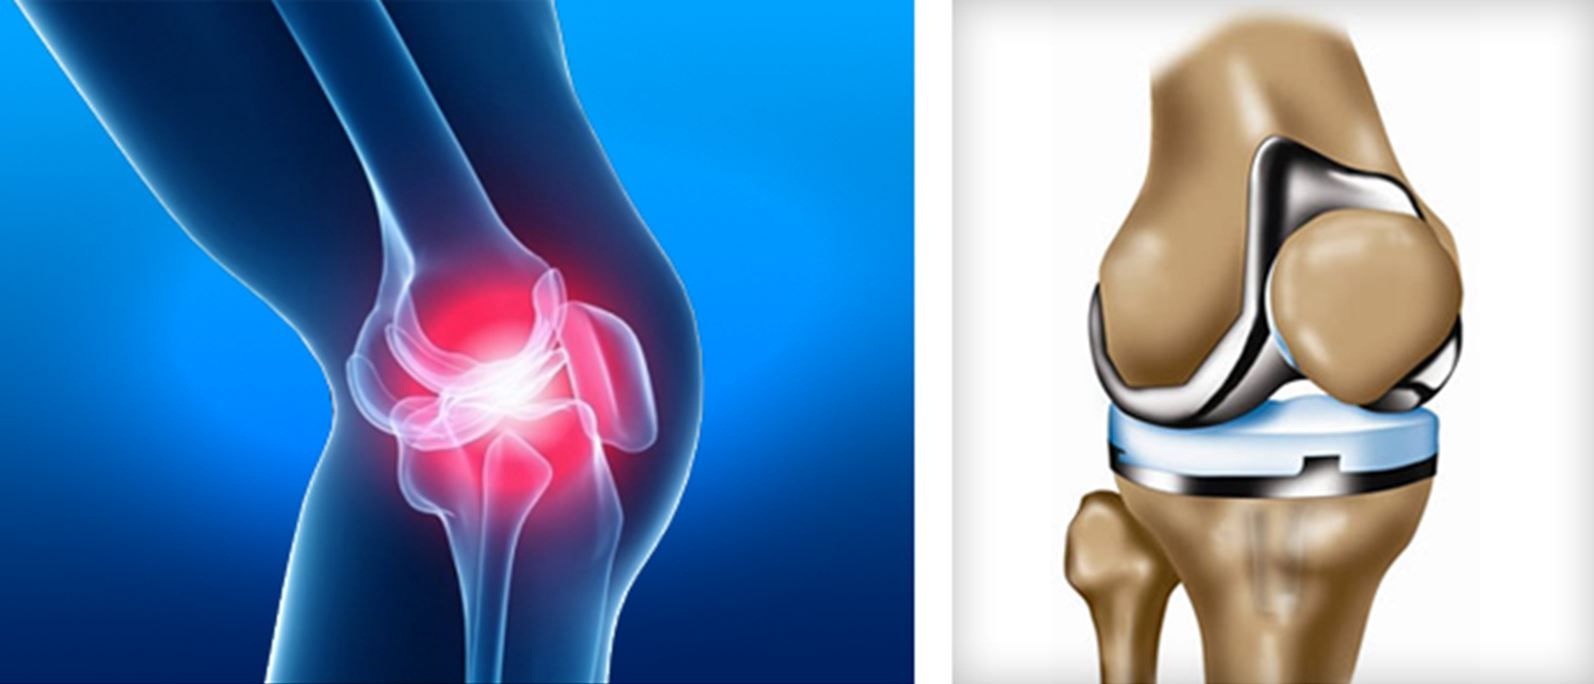 Tips to Speed Your Recovery after Knee Replacement Surgery